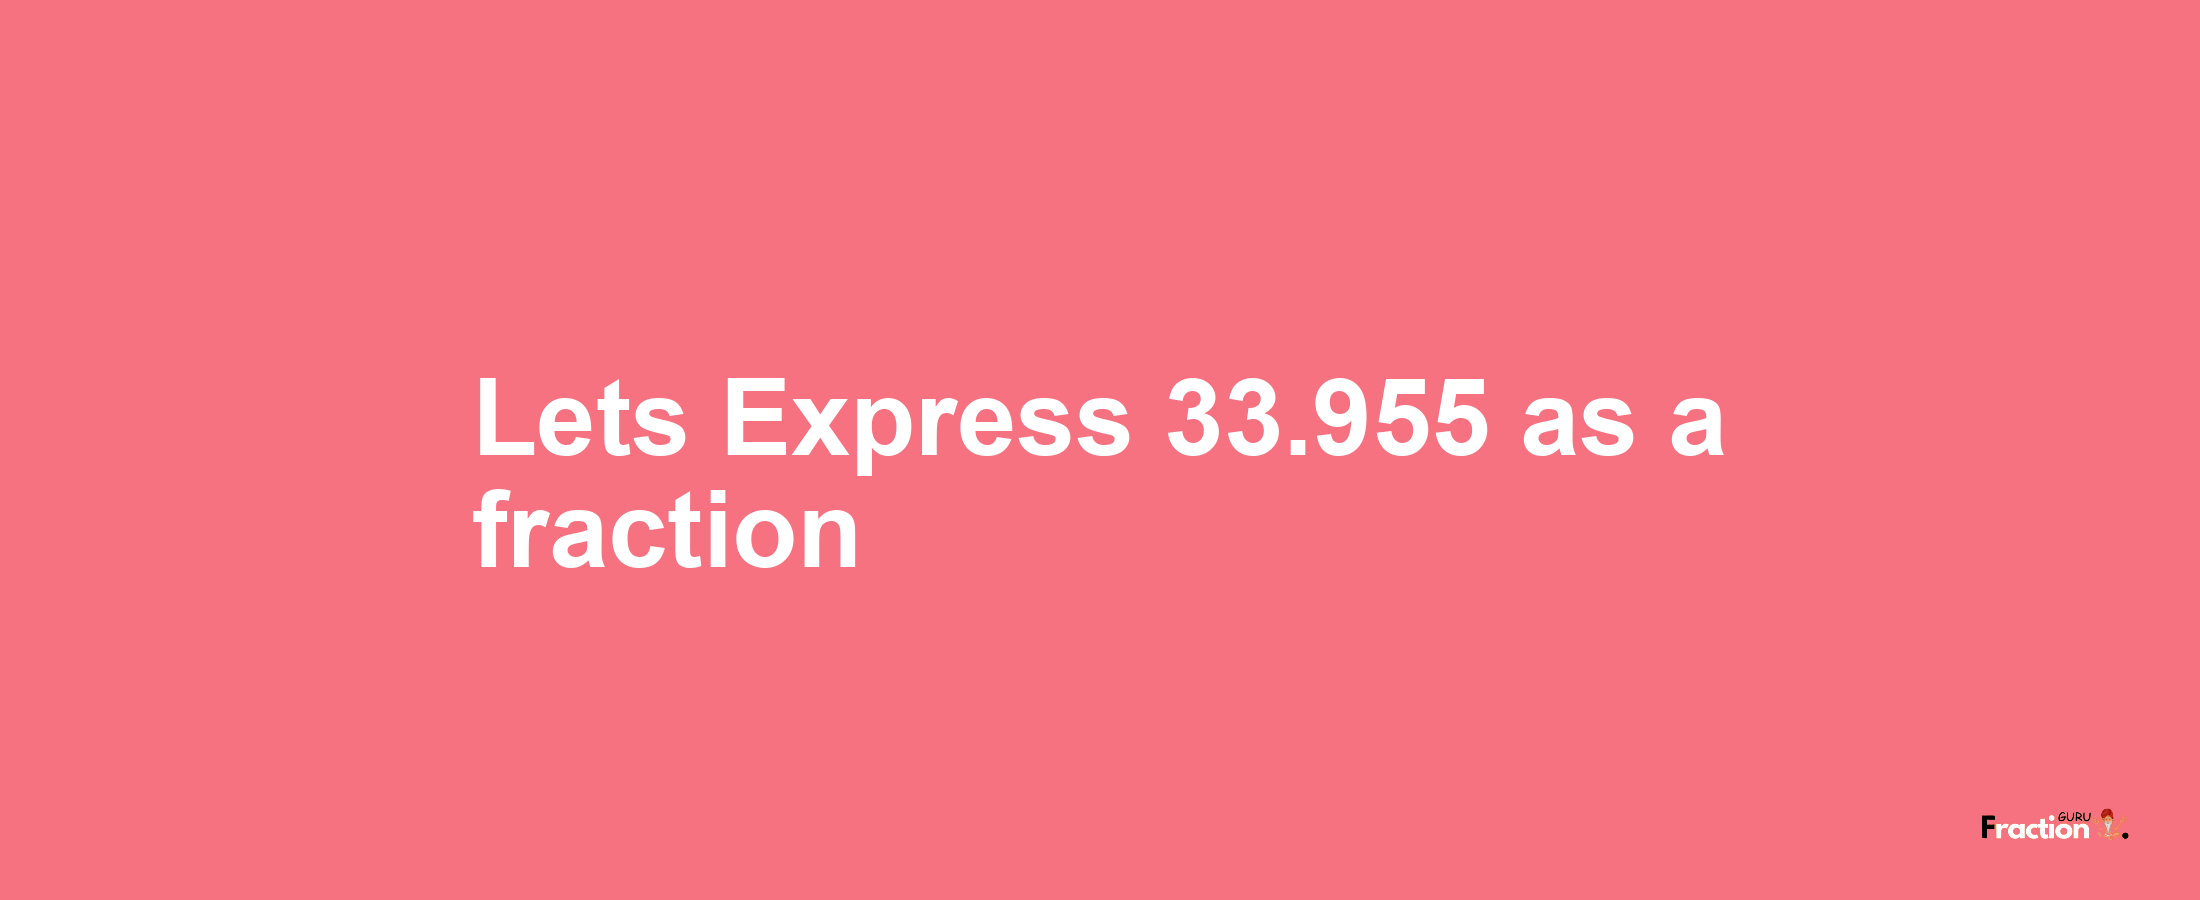 Lets Express 33.955 as afraction